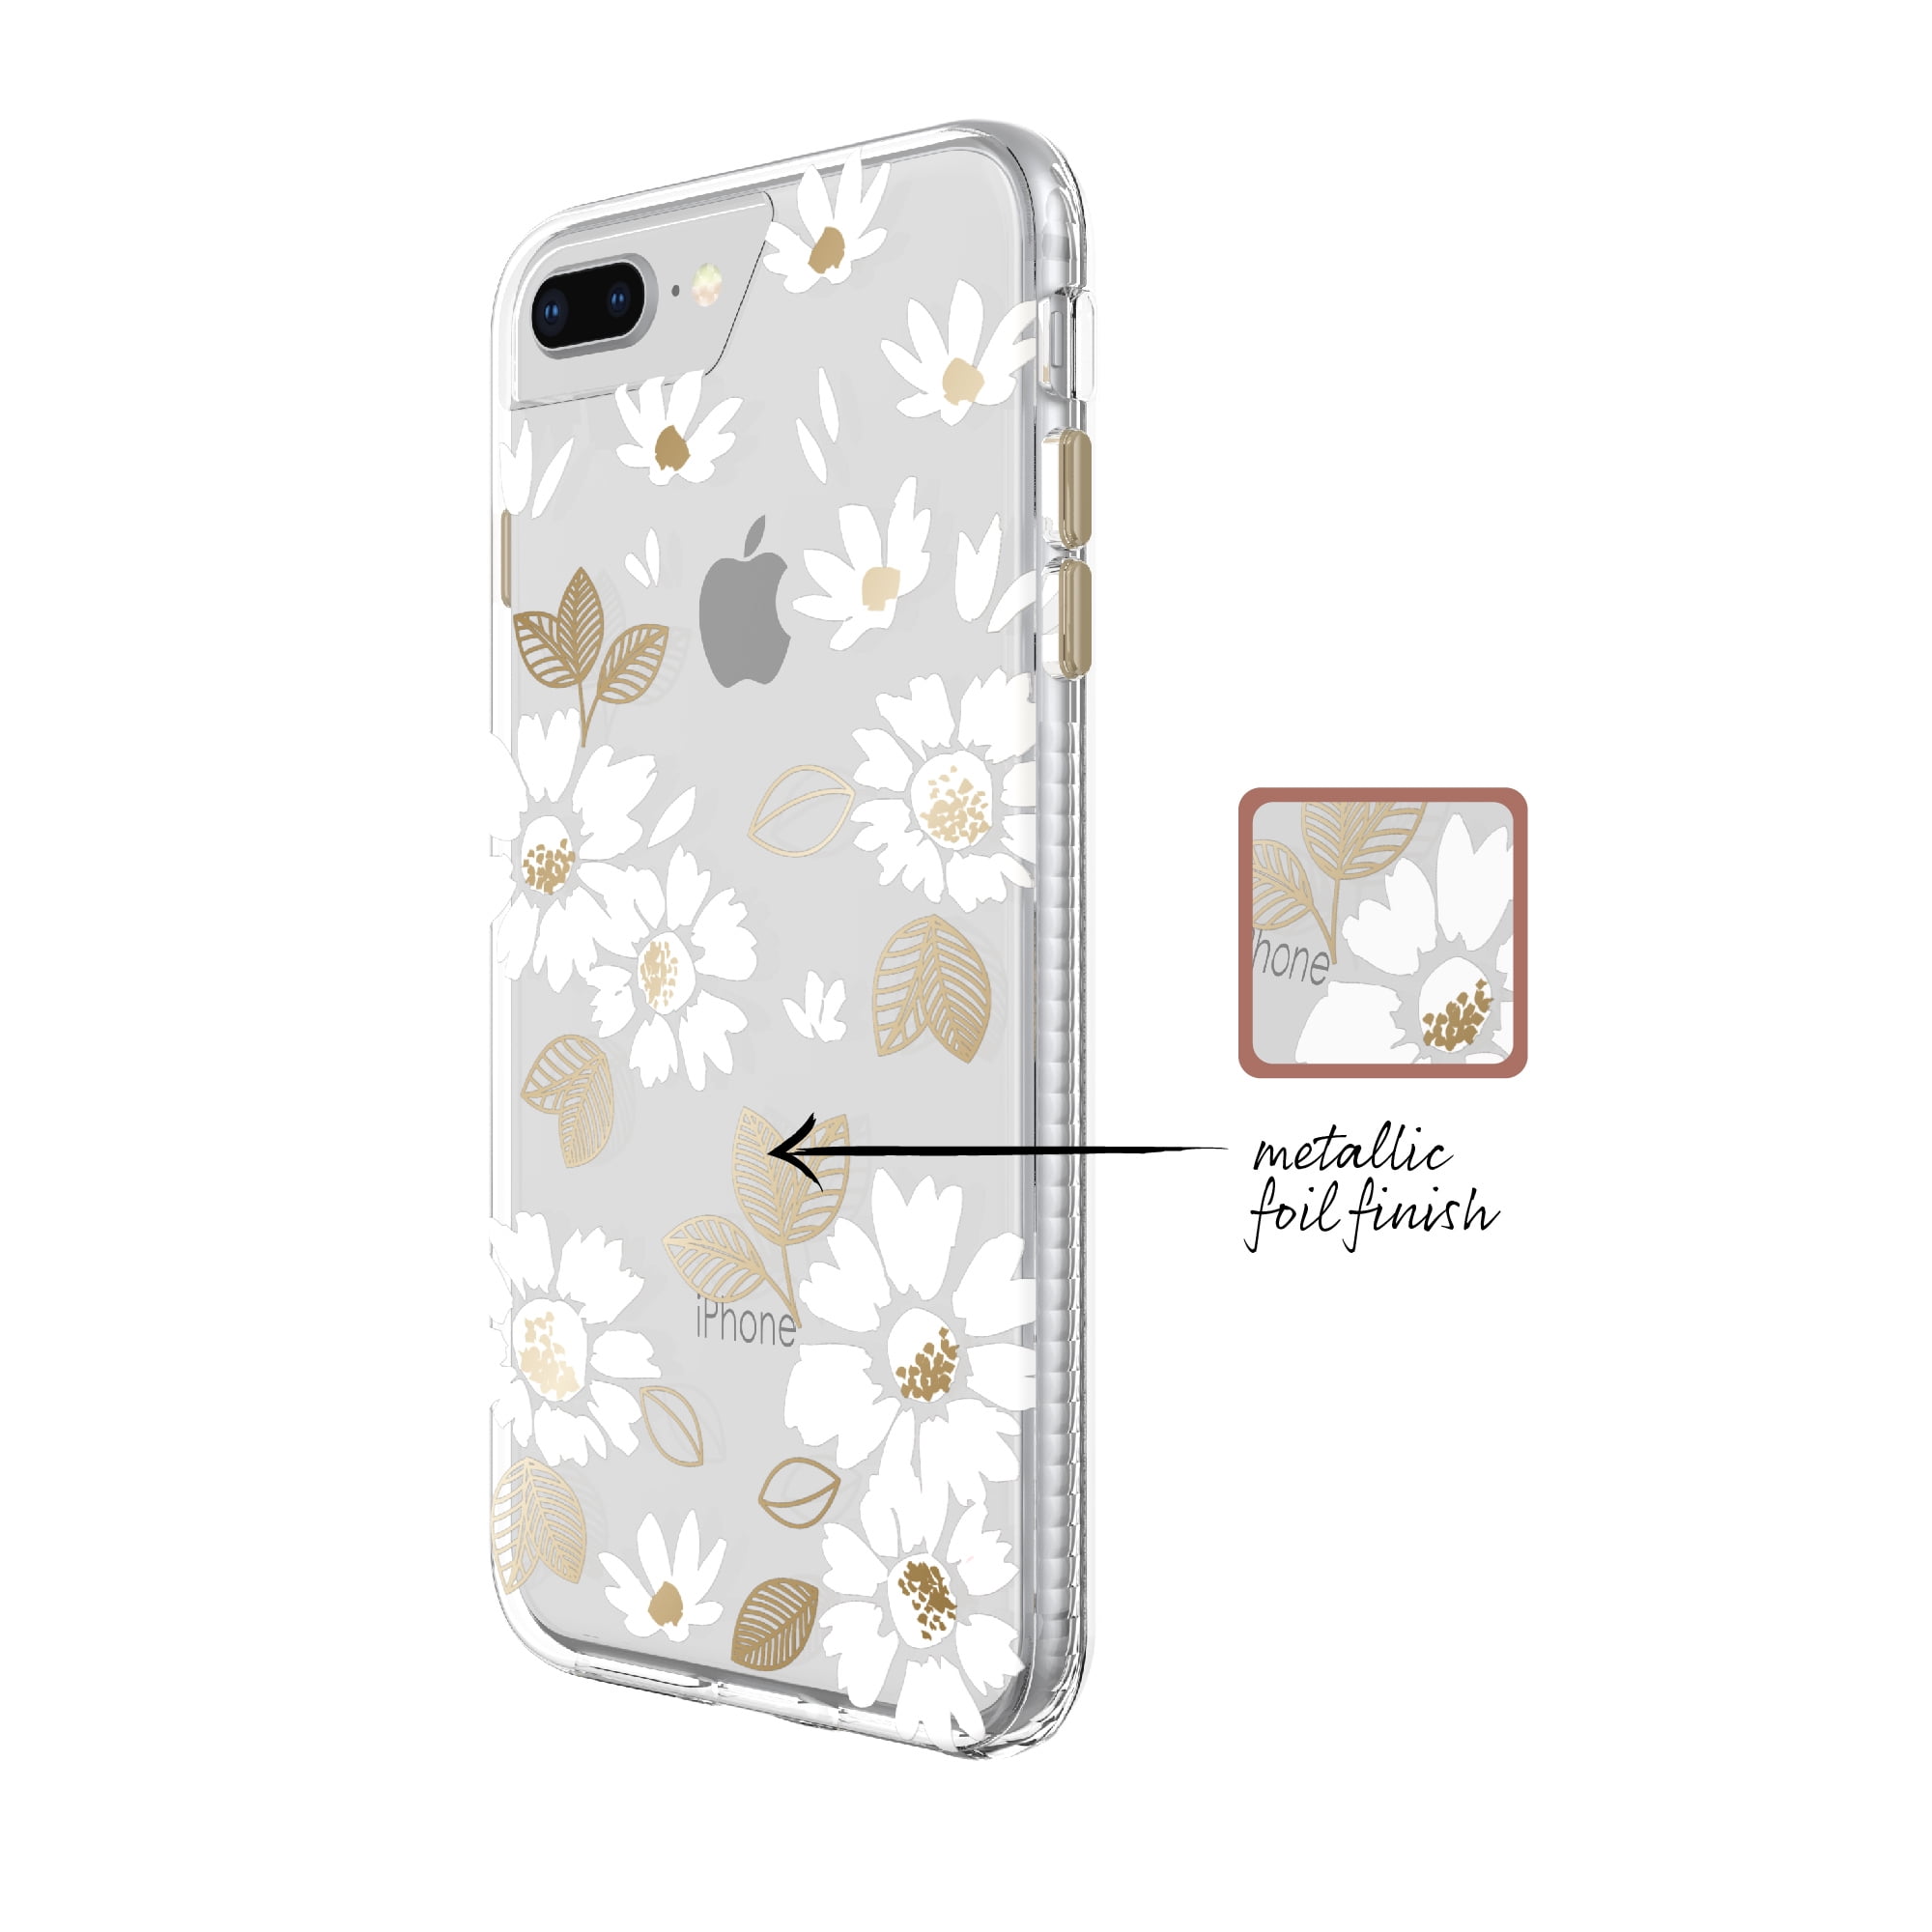 6, Case Fellowes Fashion & iPhone WriteRight 8 9693701 Plus, for Clear Phone 7,